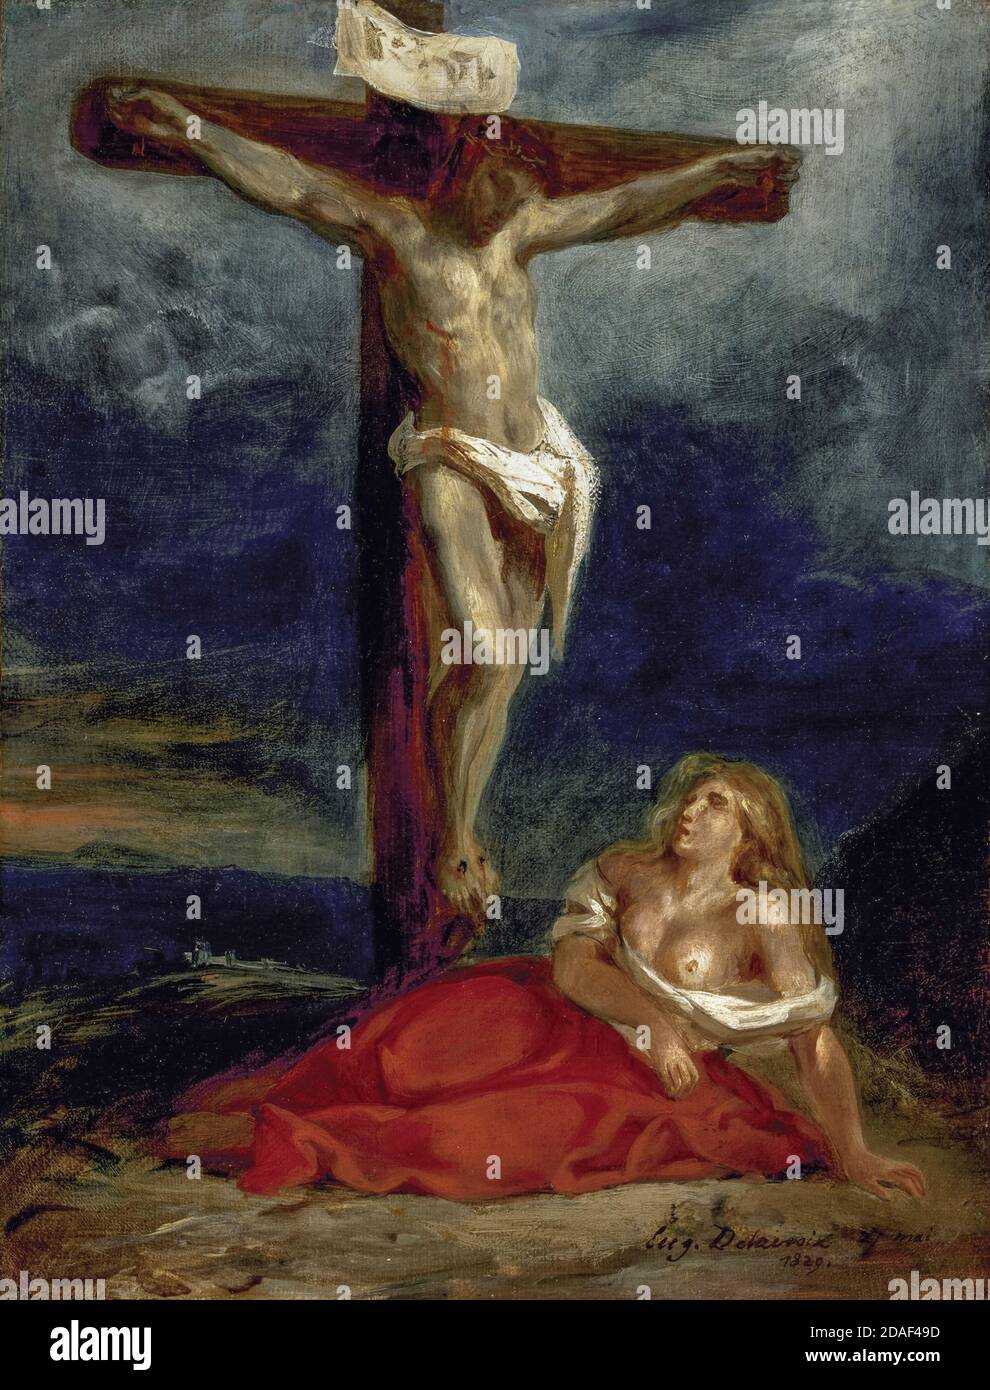 Eugène Delacroix, Saint Mary Magdalene at the Foot of the Cross, painting, 1829 Stock Photo